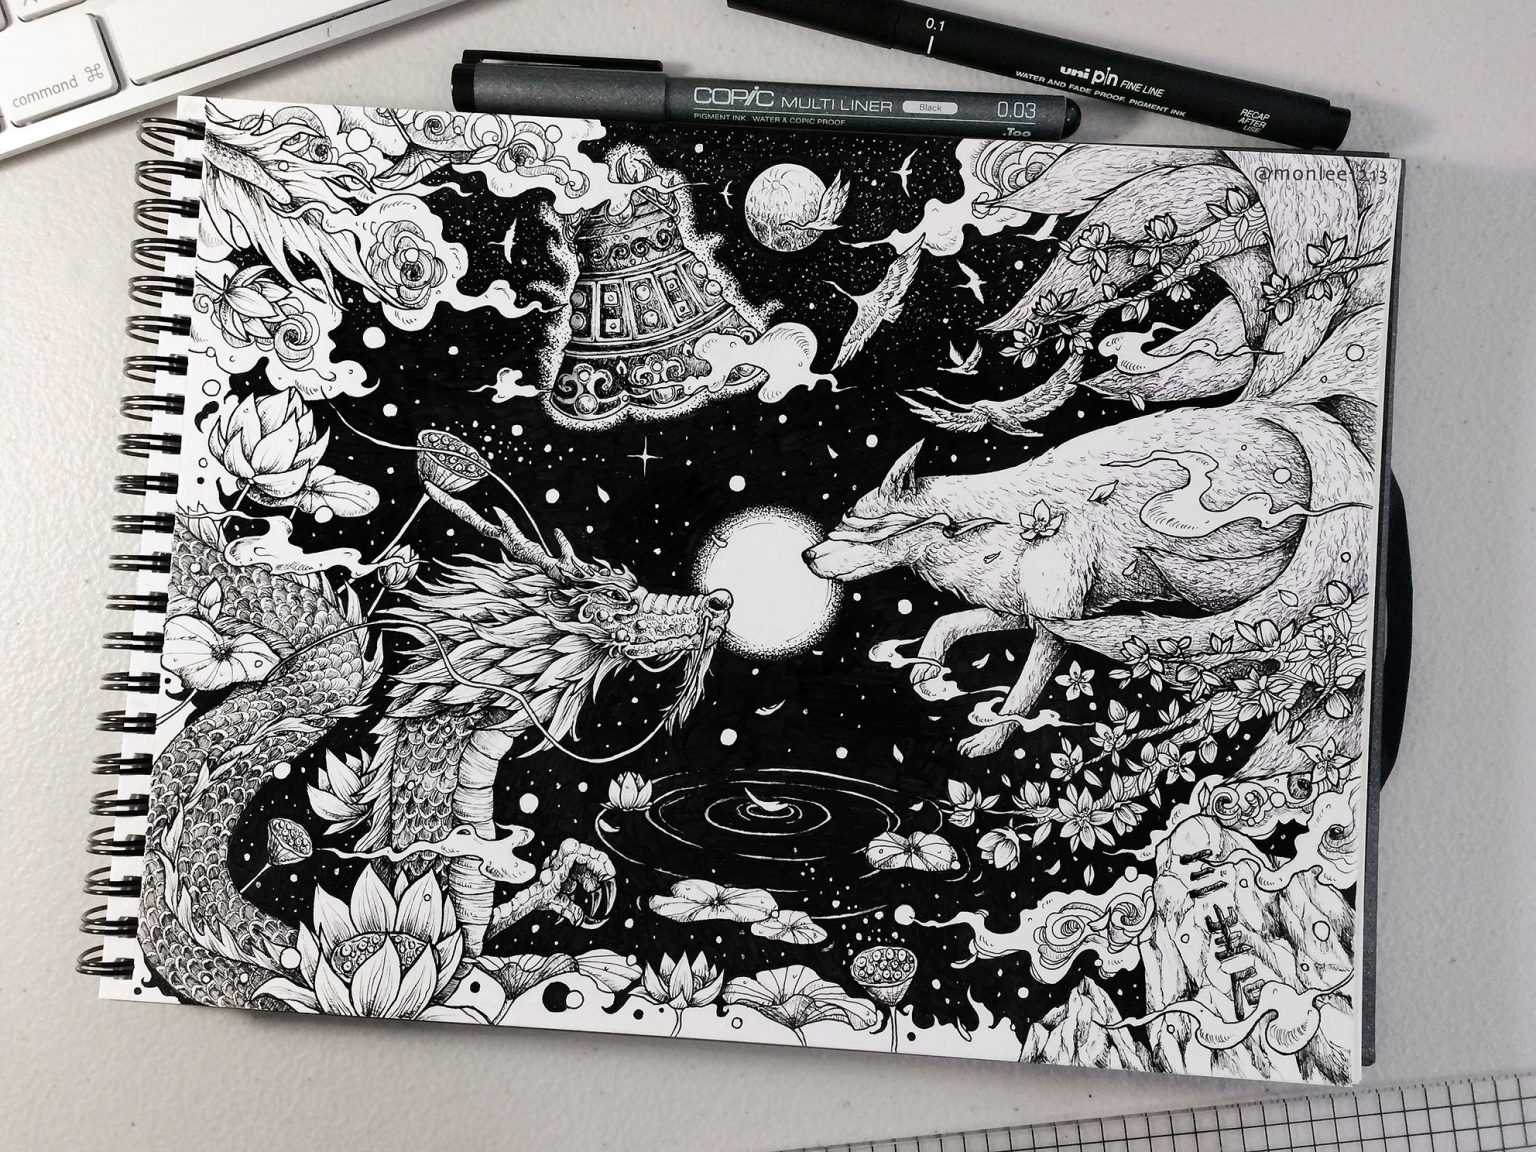 50+ Black and White Pen and Ink Drawings and Illustrations